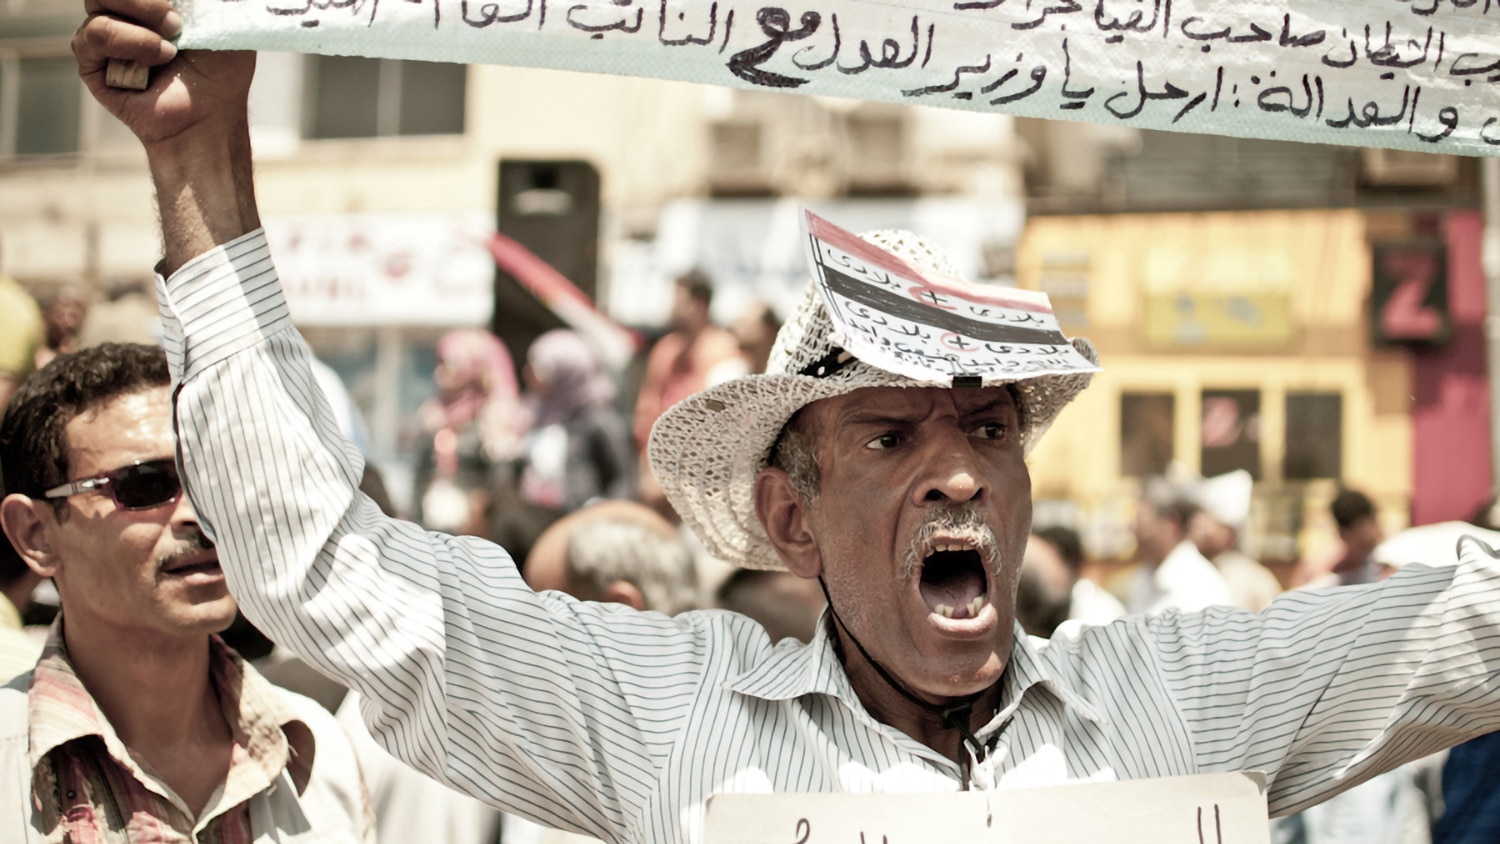 Man in the Middle East holding a protest banner.